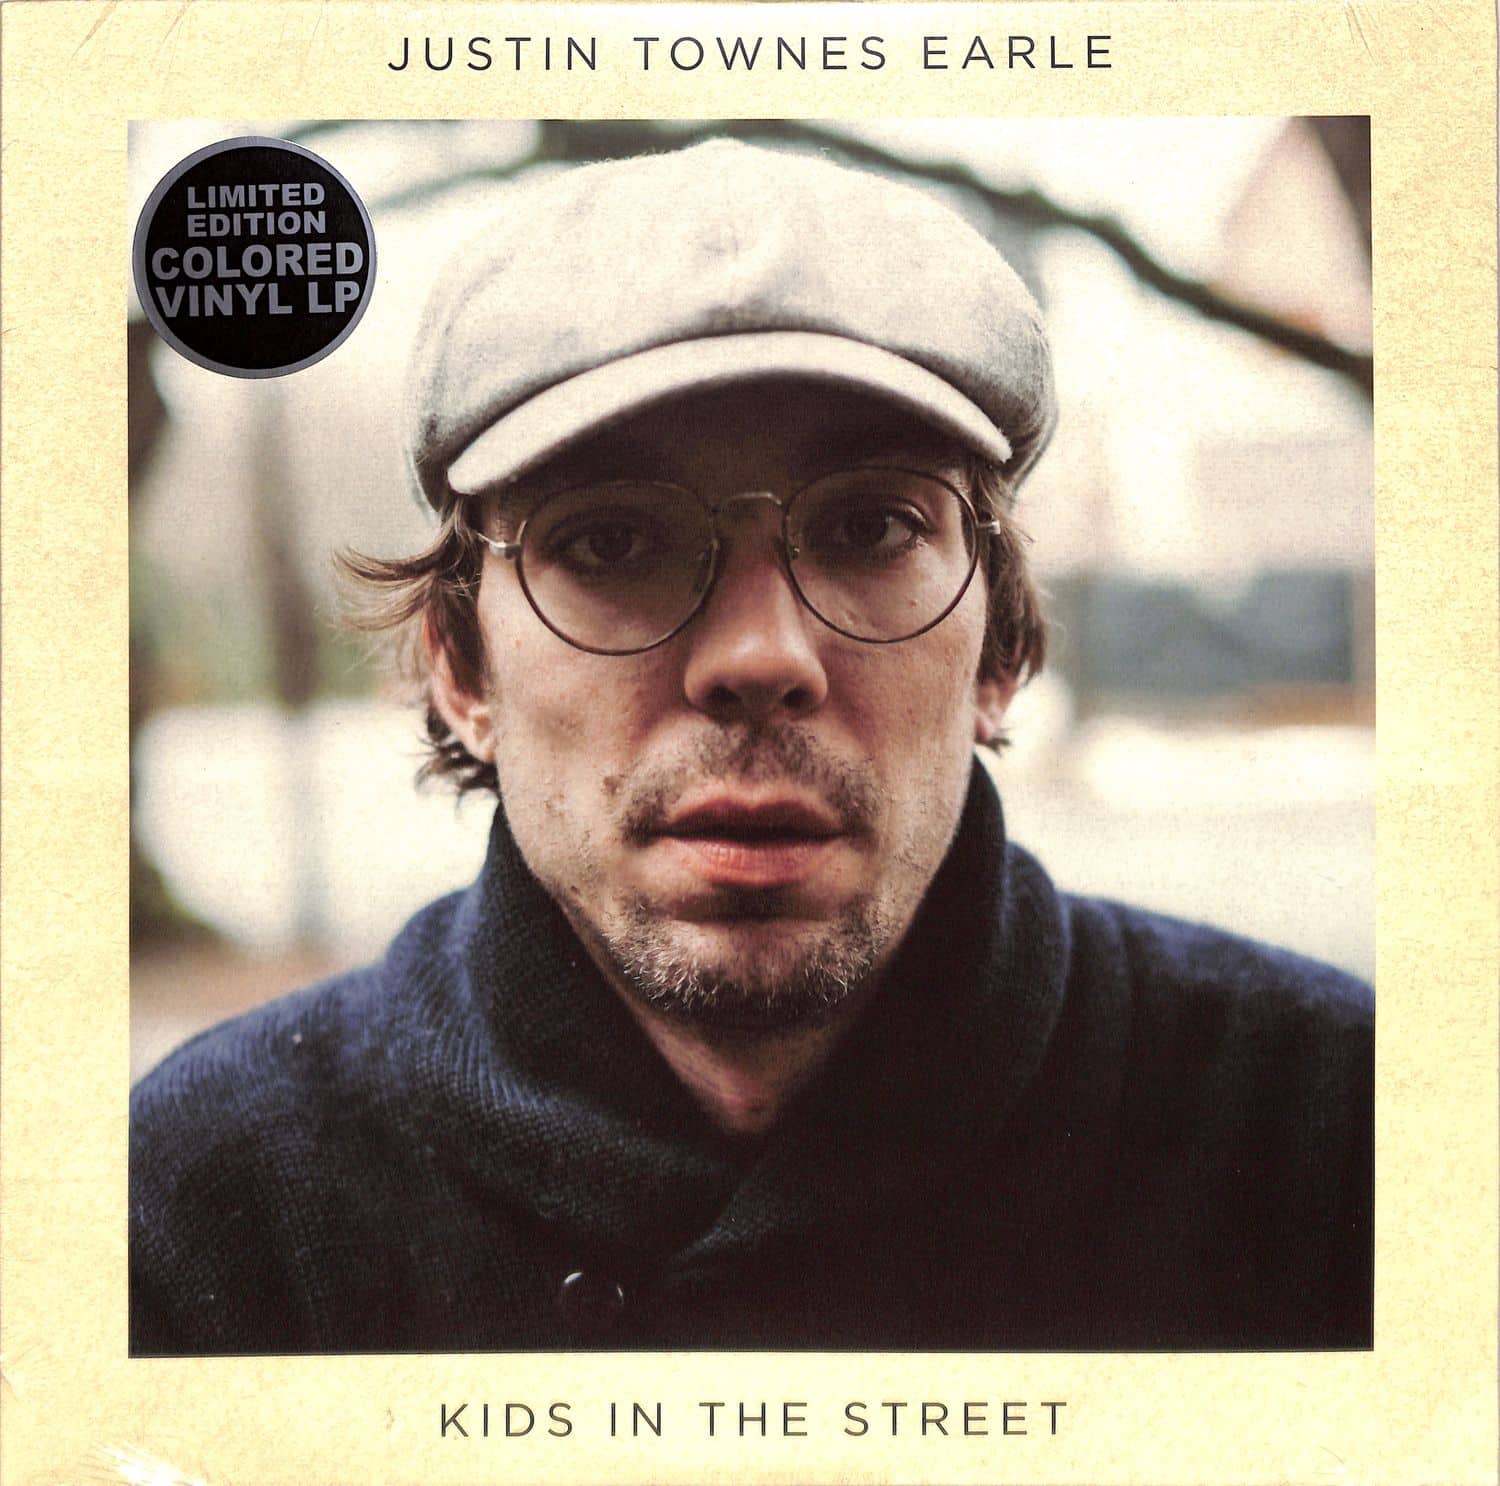 Justin Townes Earle - KIDS IN THE STREET 